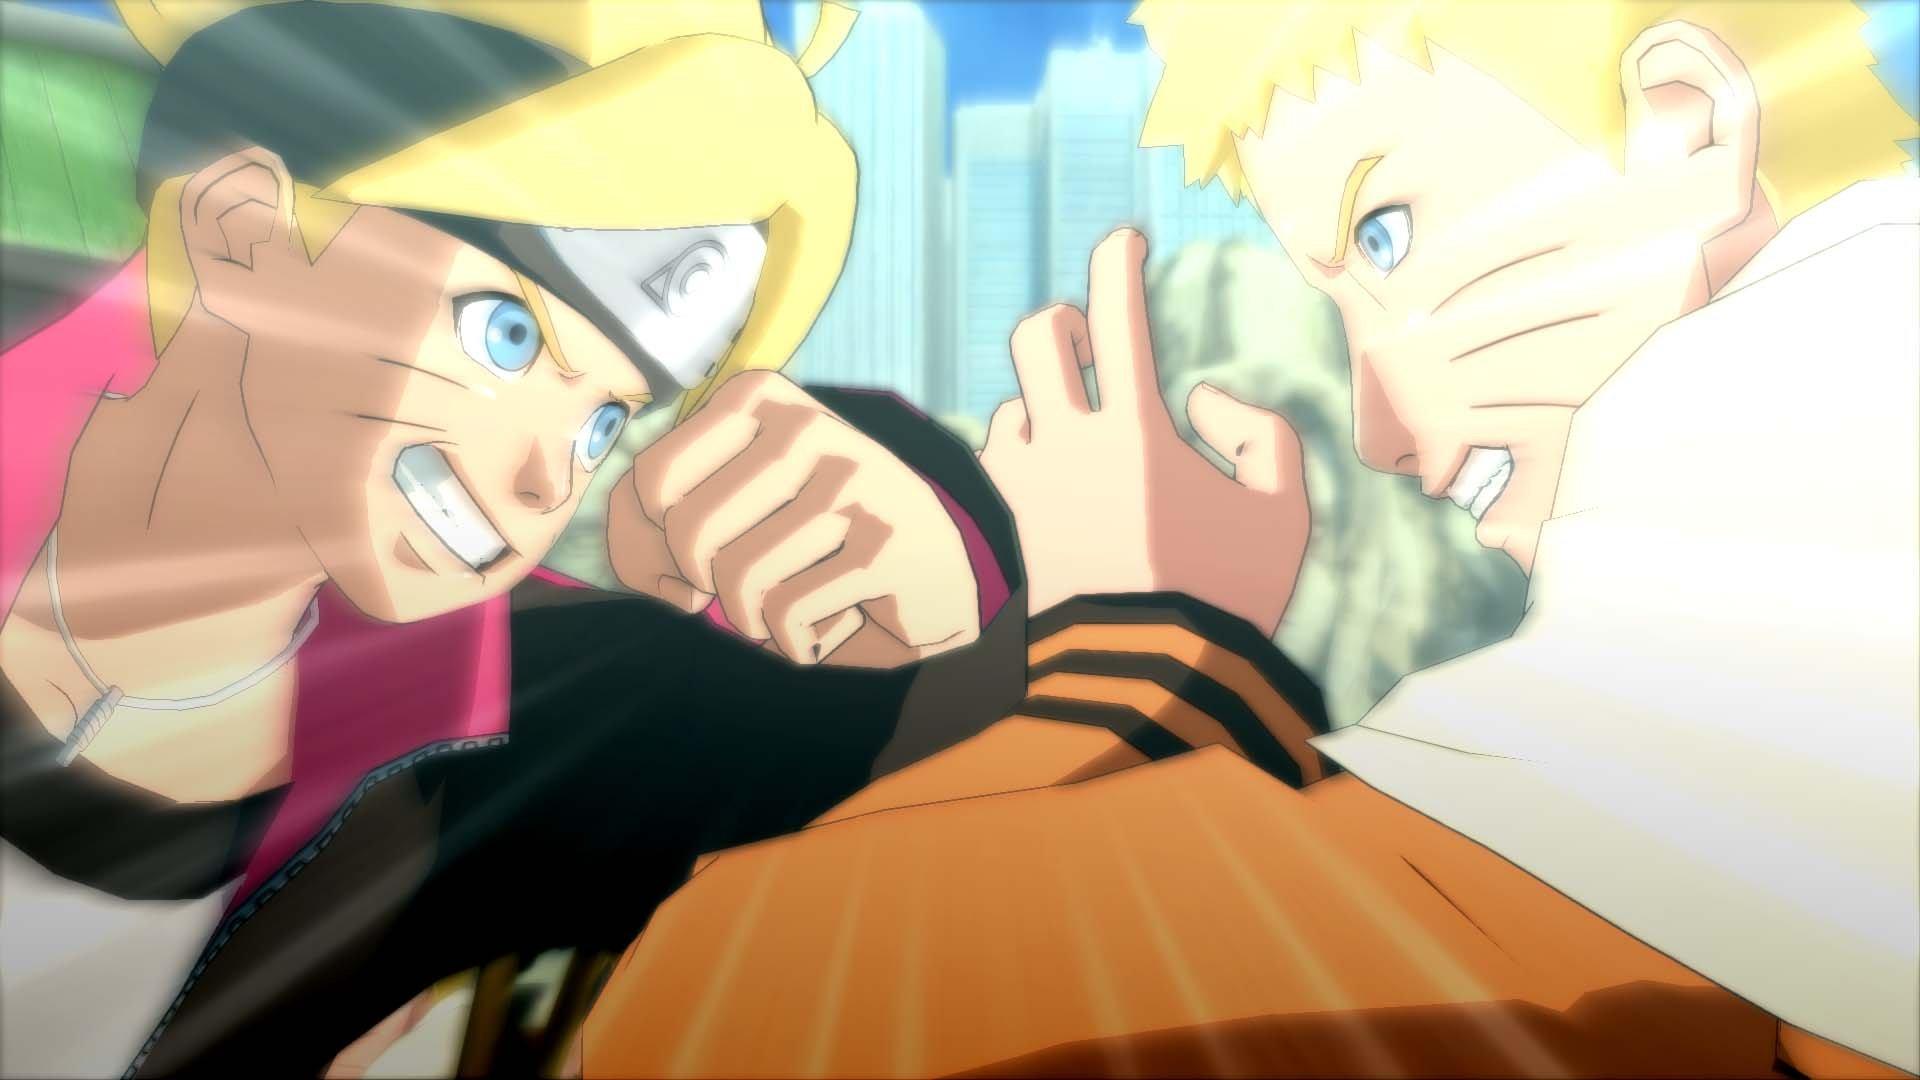 New Naruto Storm 4 Scan Details Adventure Mode, New Online Events, and  Character Skits